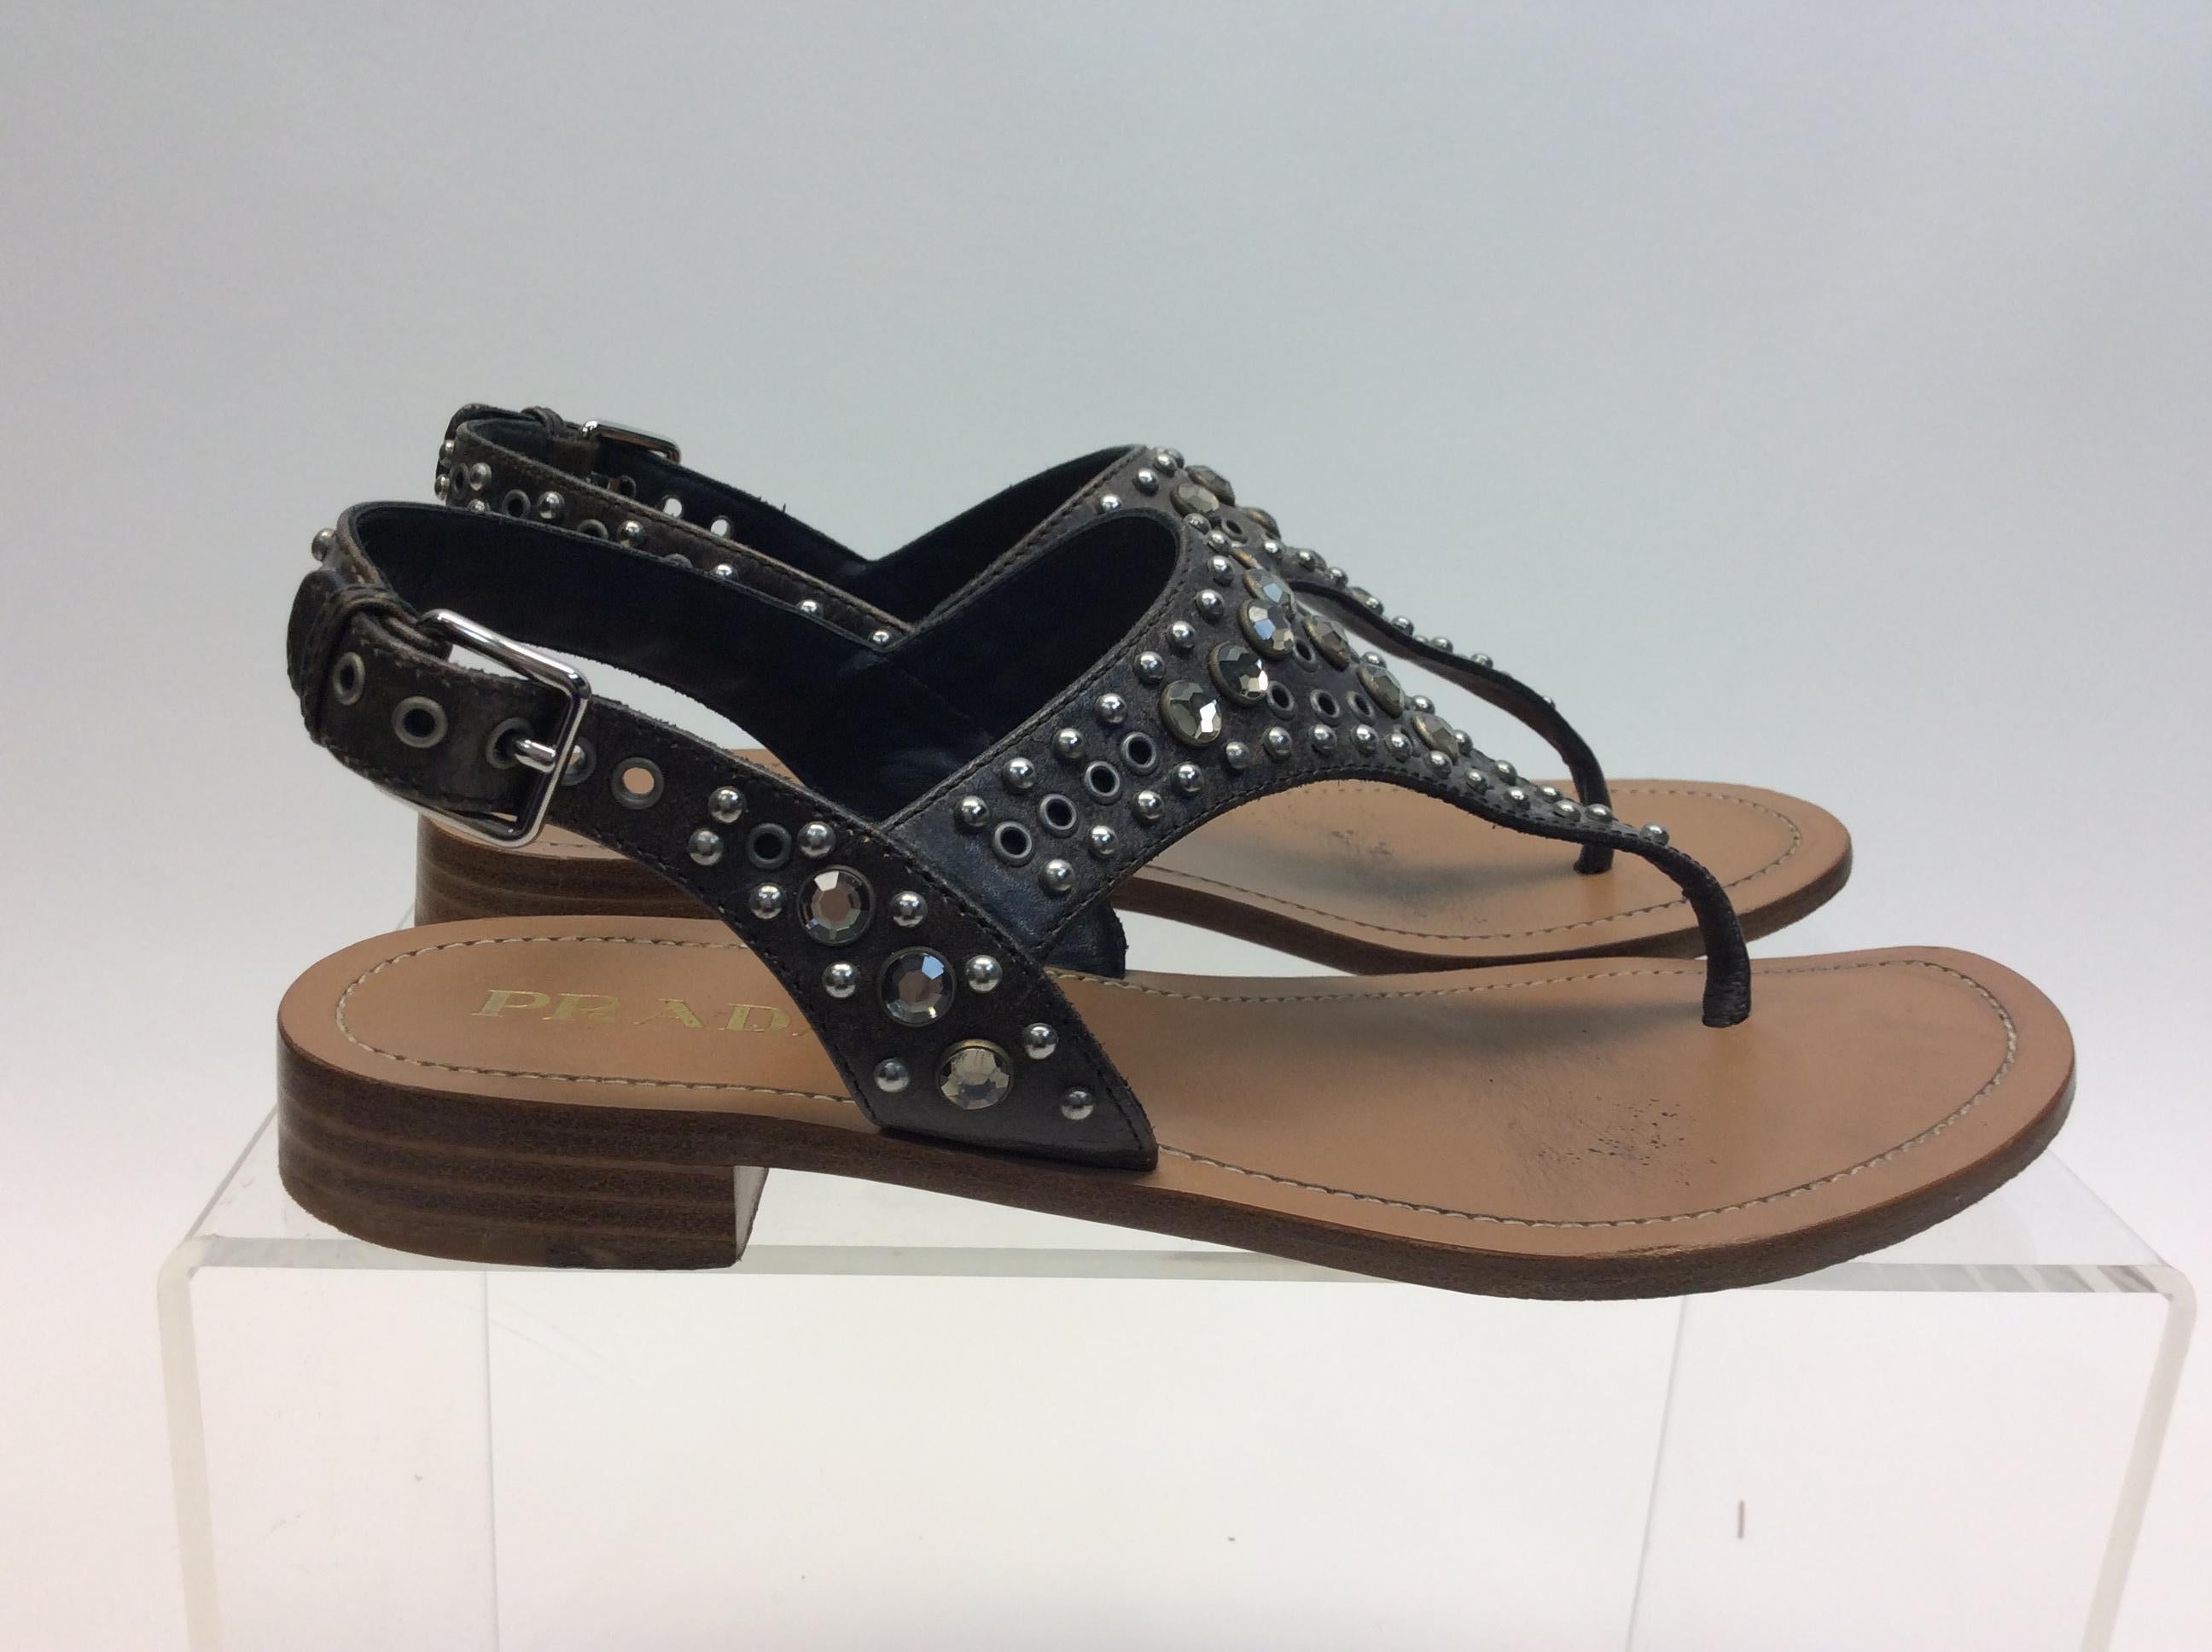 Prada Grey Studded Sandals In Good Condition For Sale In Narberth, PA